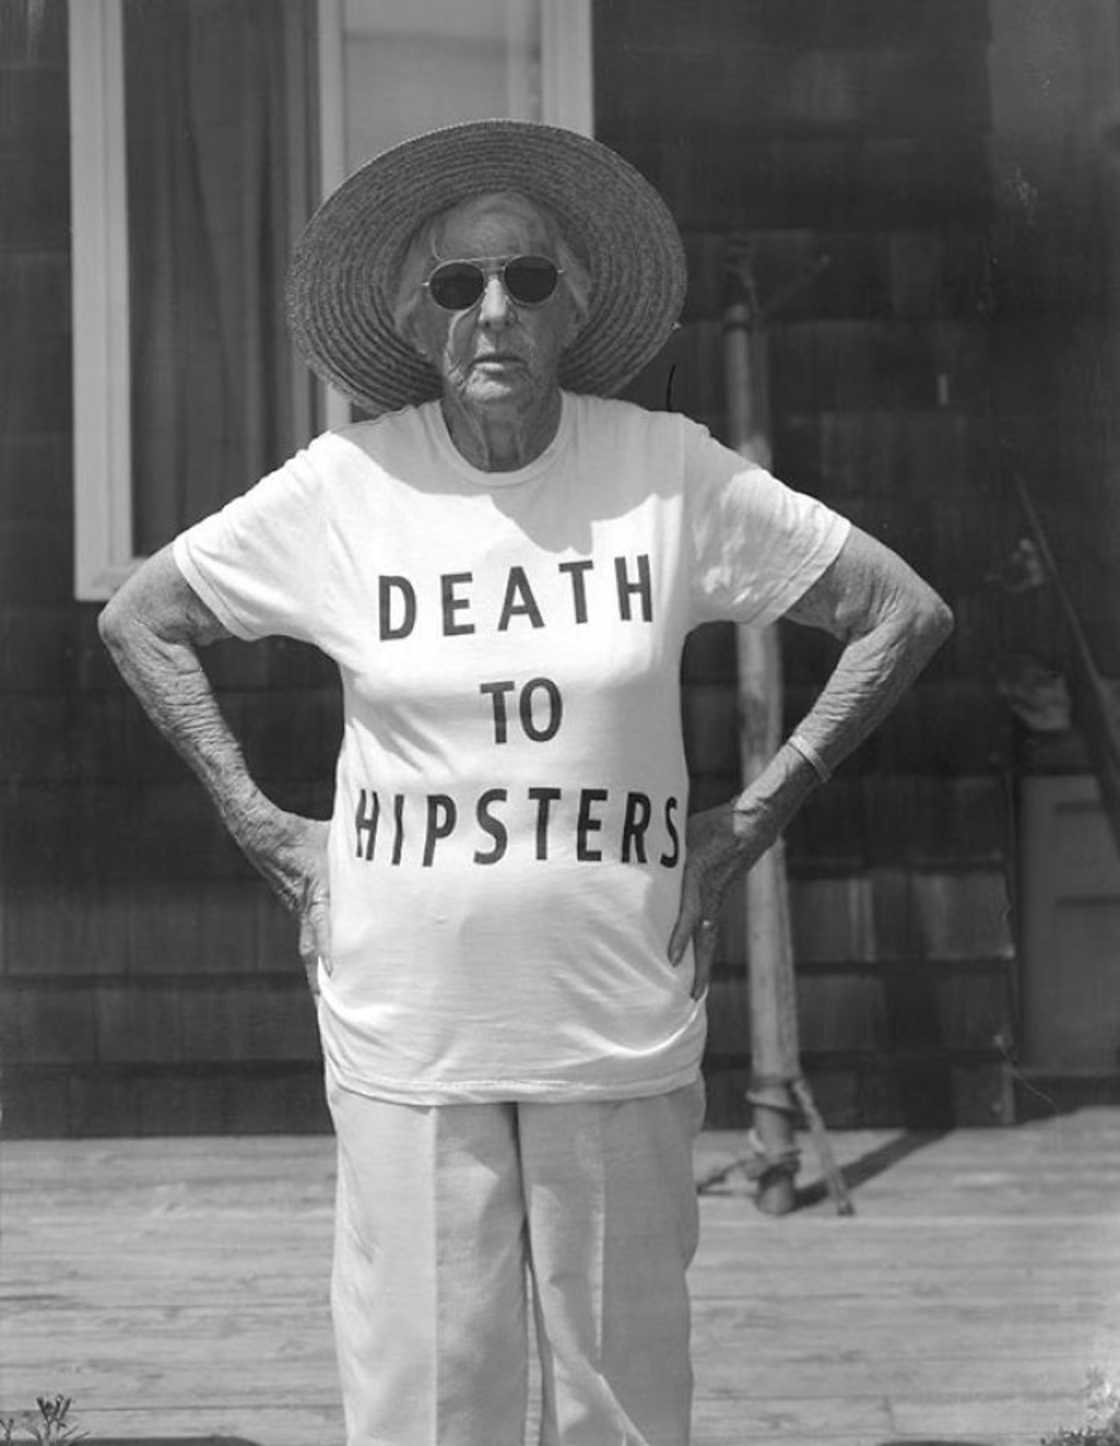 death to hipsters - Death Hipsters